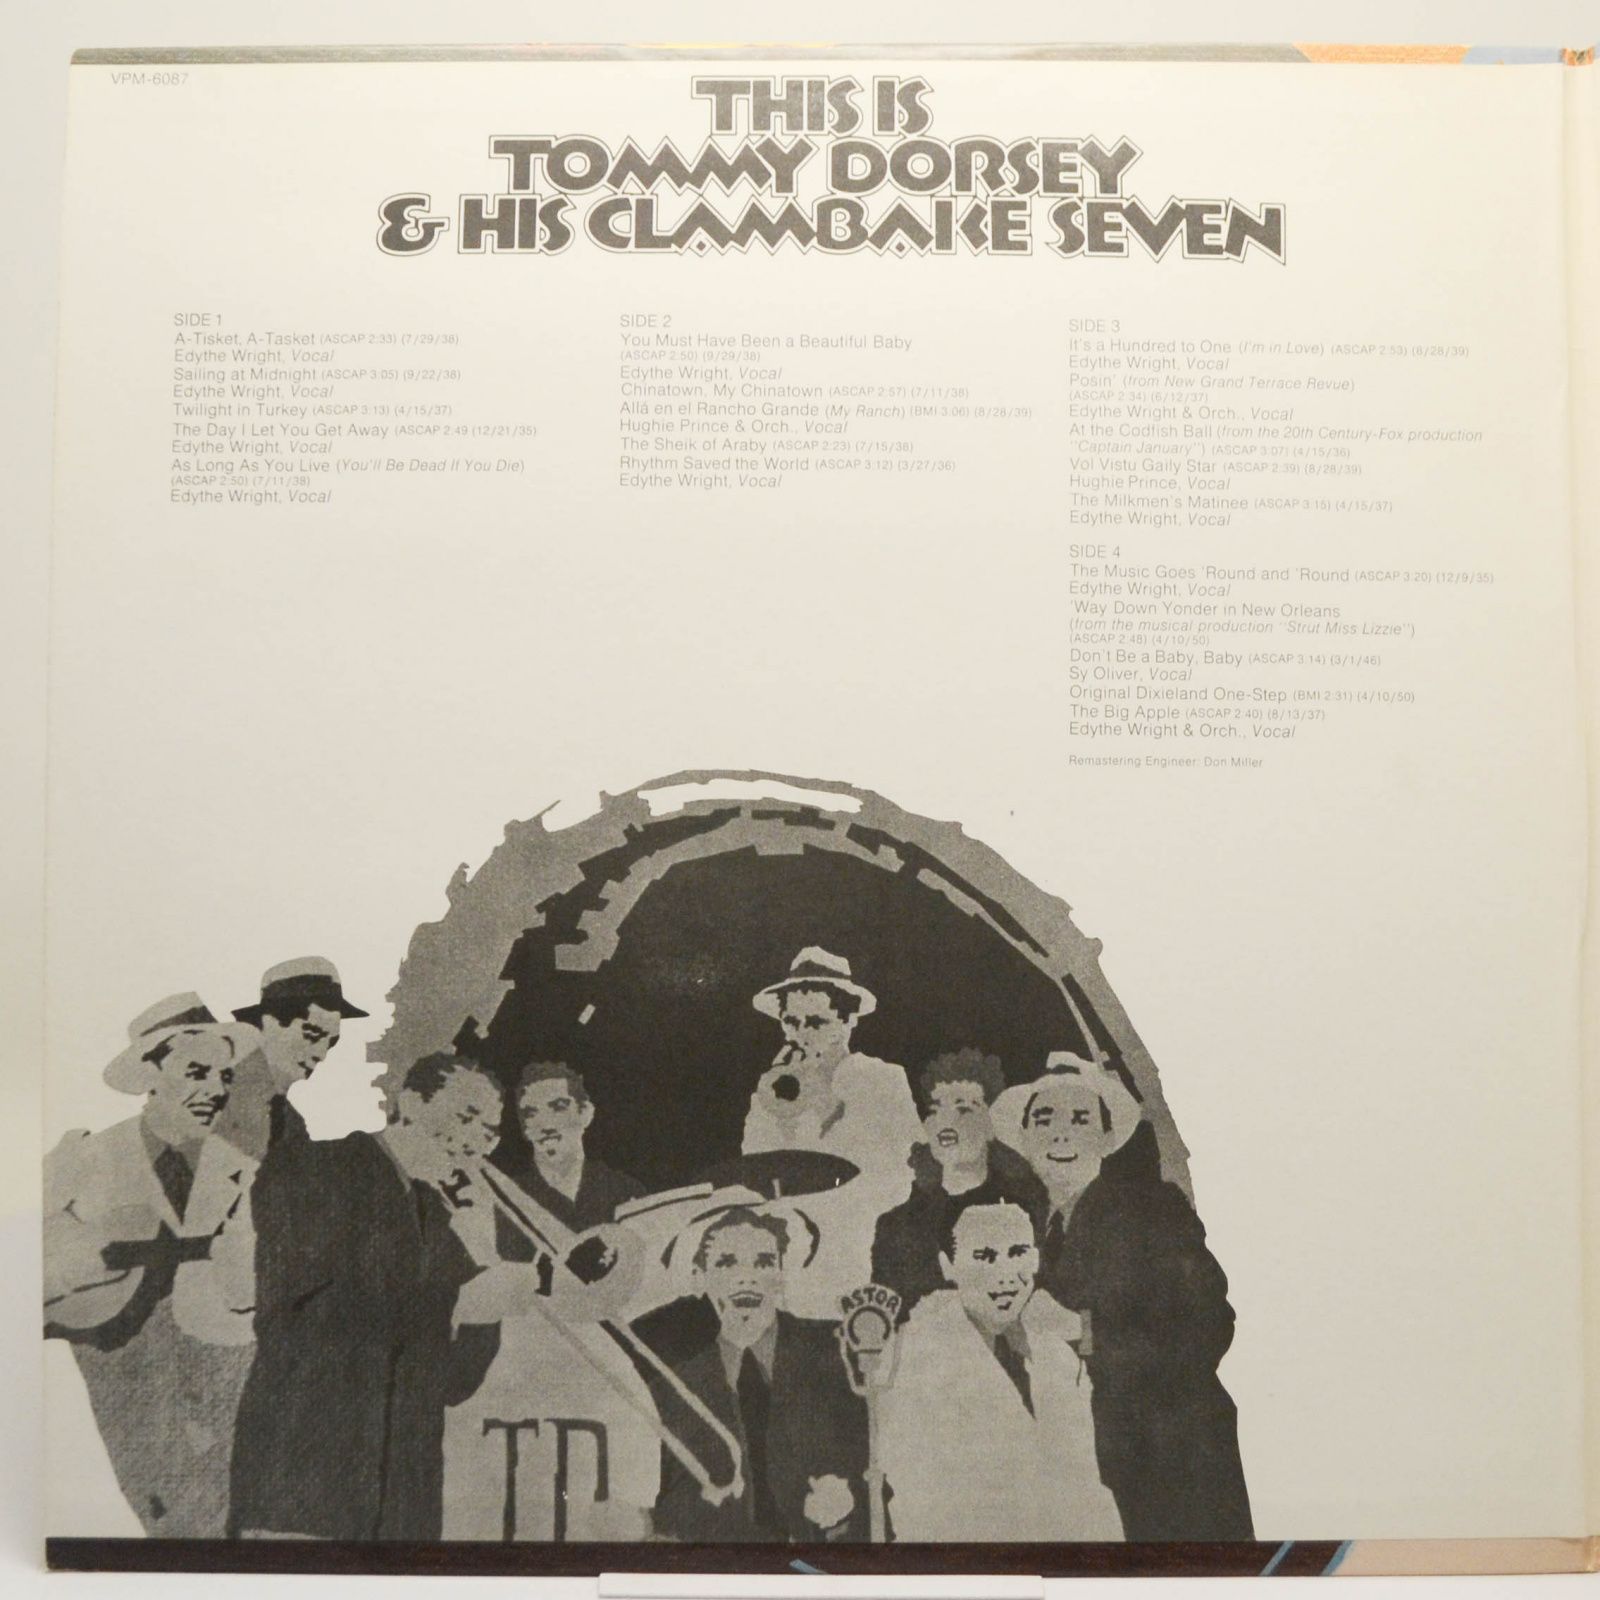 Tommy Dorsey & His Clambake Seven — This Is Tommy Dorsey & His Clambake Seven (2LP), 1973